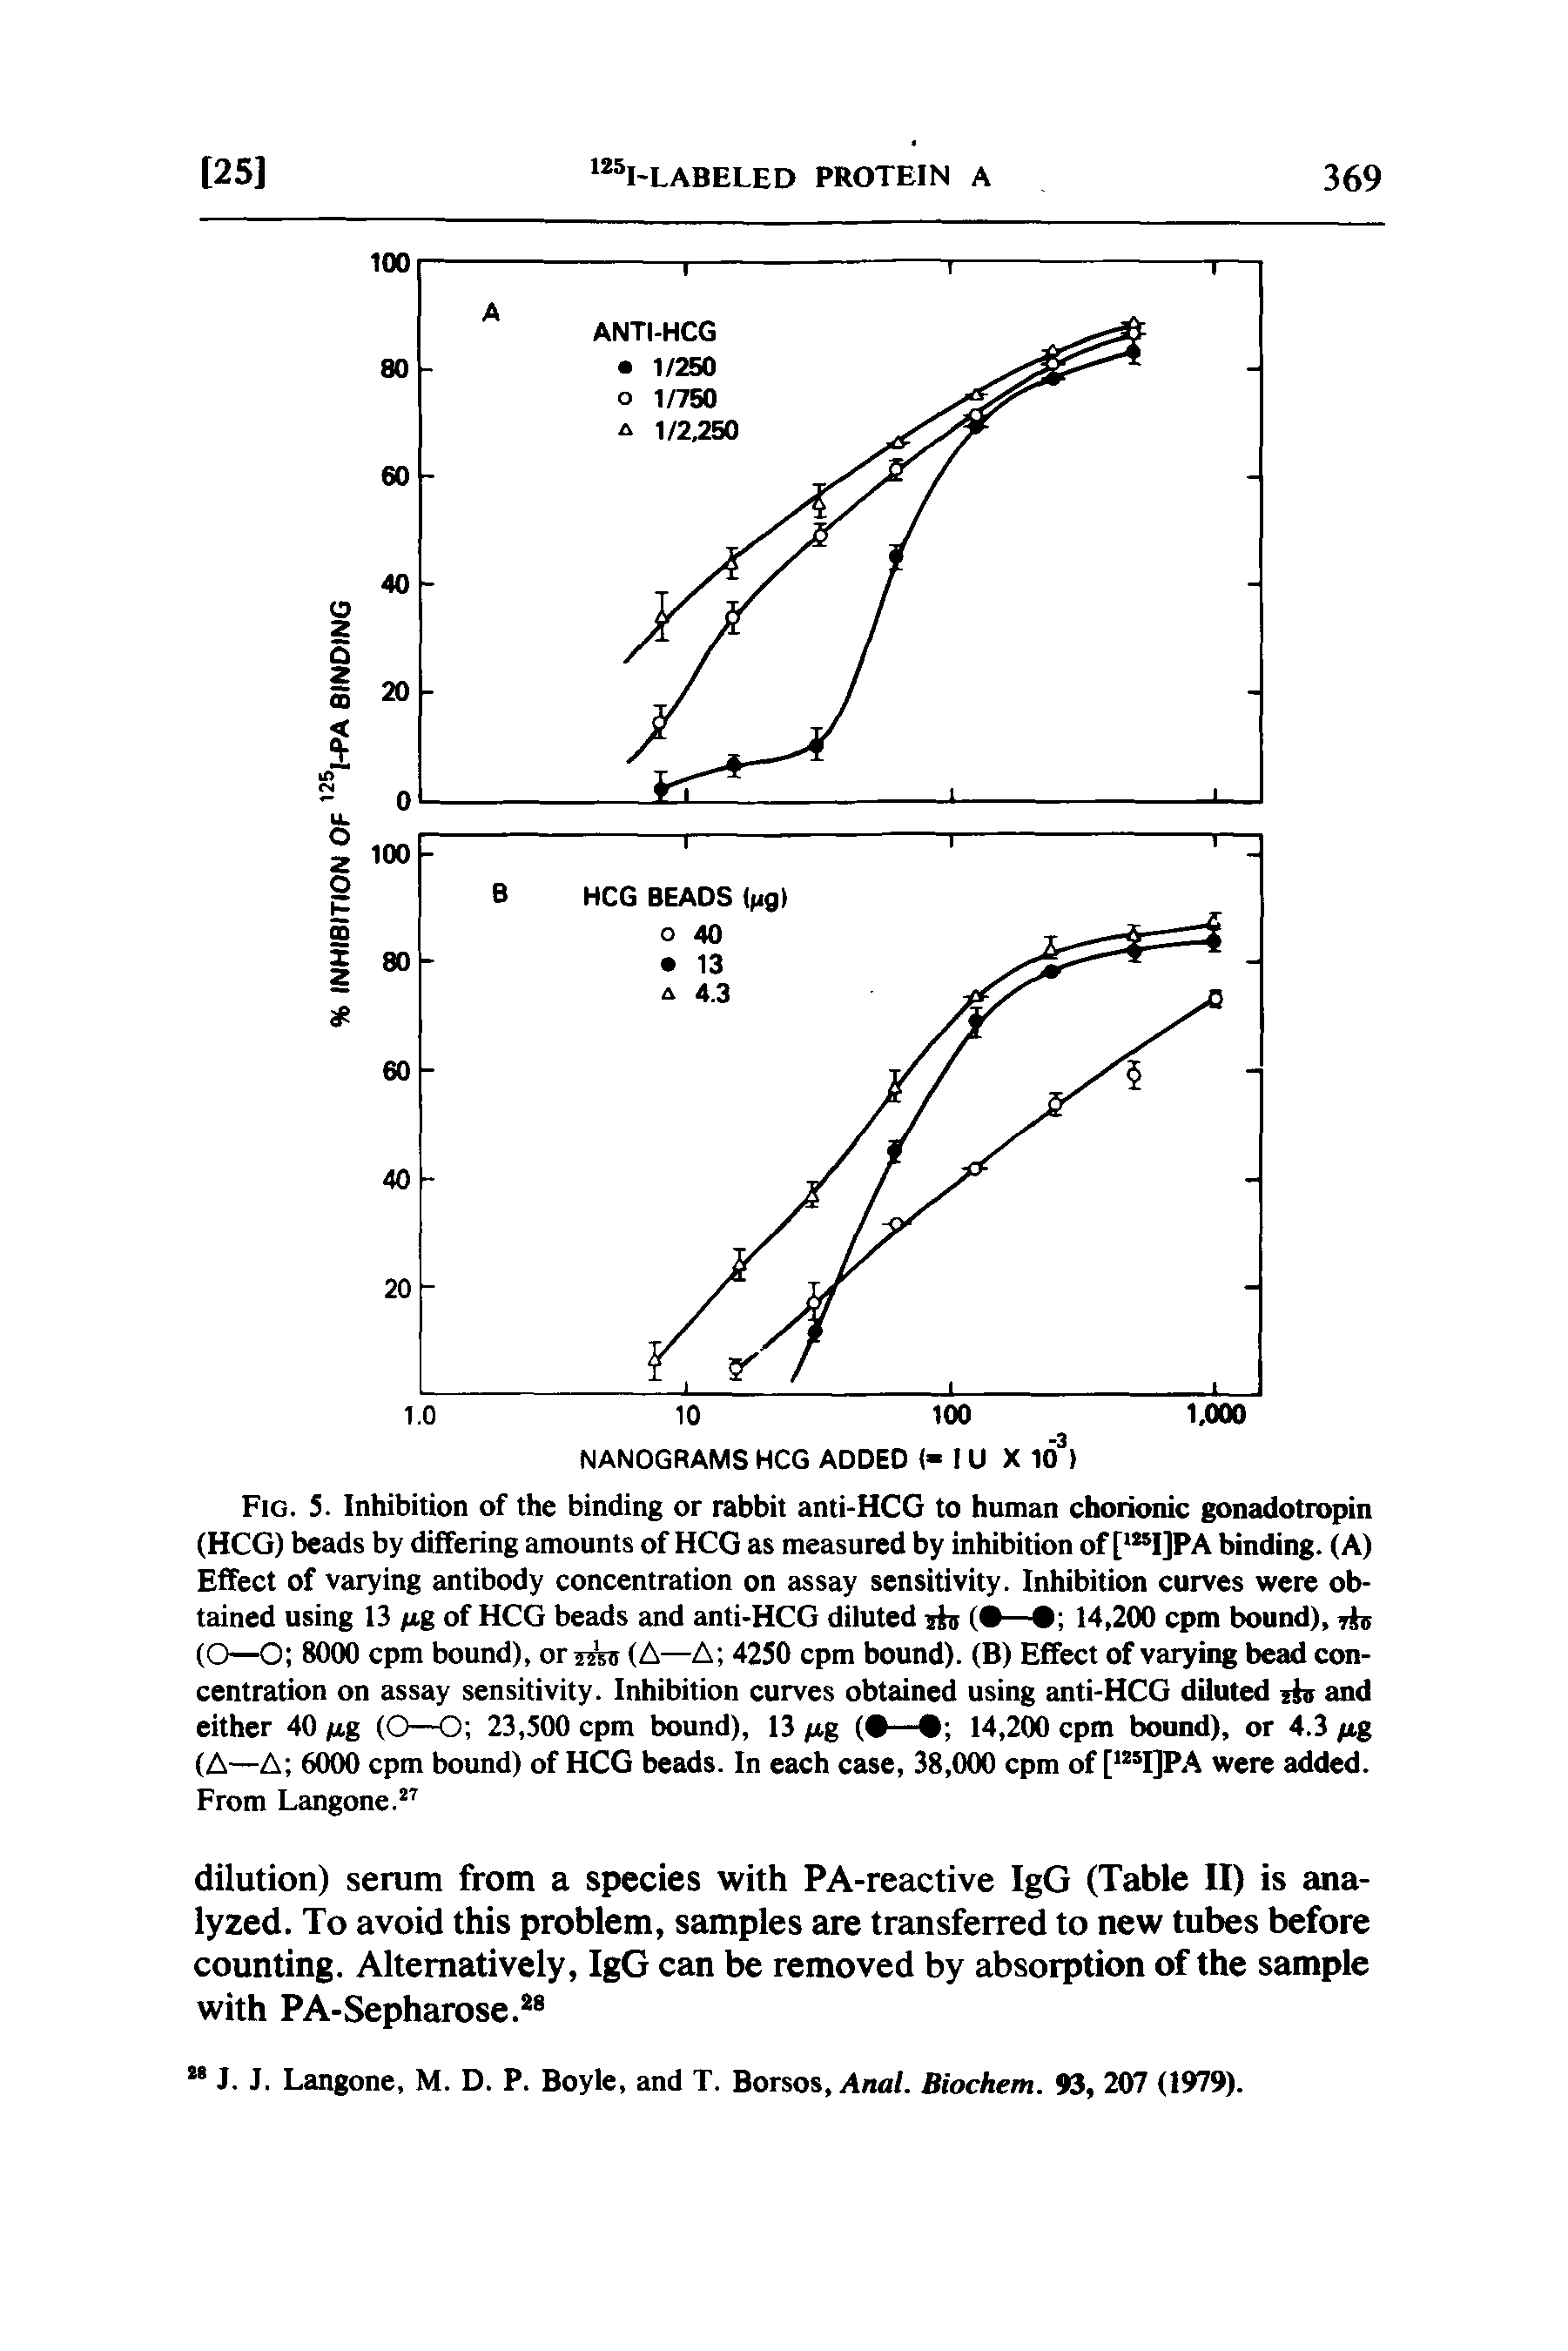 Fig. S. Inhibition of the binding or rabbit anti-HCG to human chorionic gonadotropin (HCG) beads by differing amounts of HCG as measured by inhibition of [ I]PA binding. (A) Effect of varying antibody concentration on assay sensitivity. Inhibition curves were obtained using 13 ig of HCG beads and anti-HCG diluted li ( — 14,2(X) cpm bound), jhi (O—O 80(X) cpm bound), orj W (A—A 4250 cpm bound). (B) Effect of varying bead concentration on assay sensitivity. Inhibition curves obtained using anti-HCG diluted jin and either 40 ng (O—O 23,500 cpm bound), 13 /xg ( — 14,200 cpm bound), or 4.3 fig (A—A 6000 cpm bound) of HCG beads. In each case, 38,000 cpm of [ I]PA were added. From Langone. ...